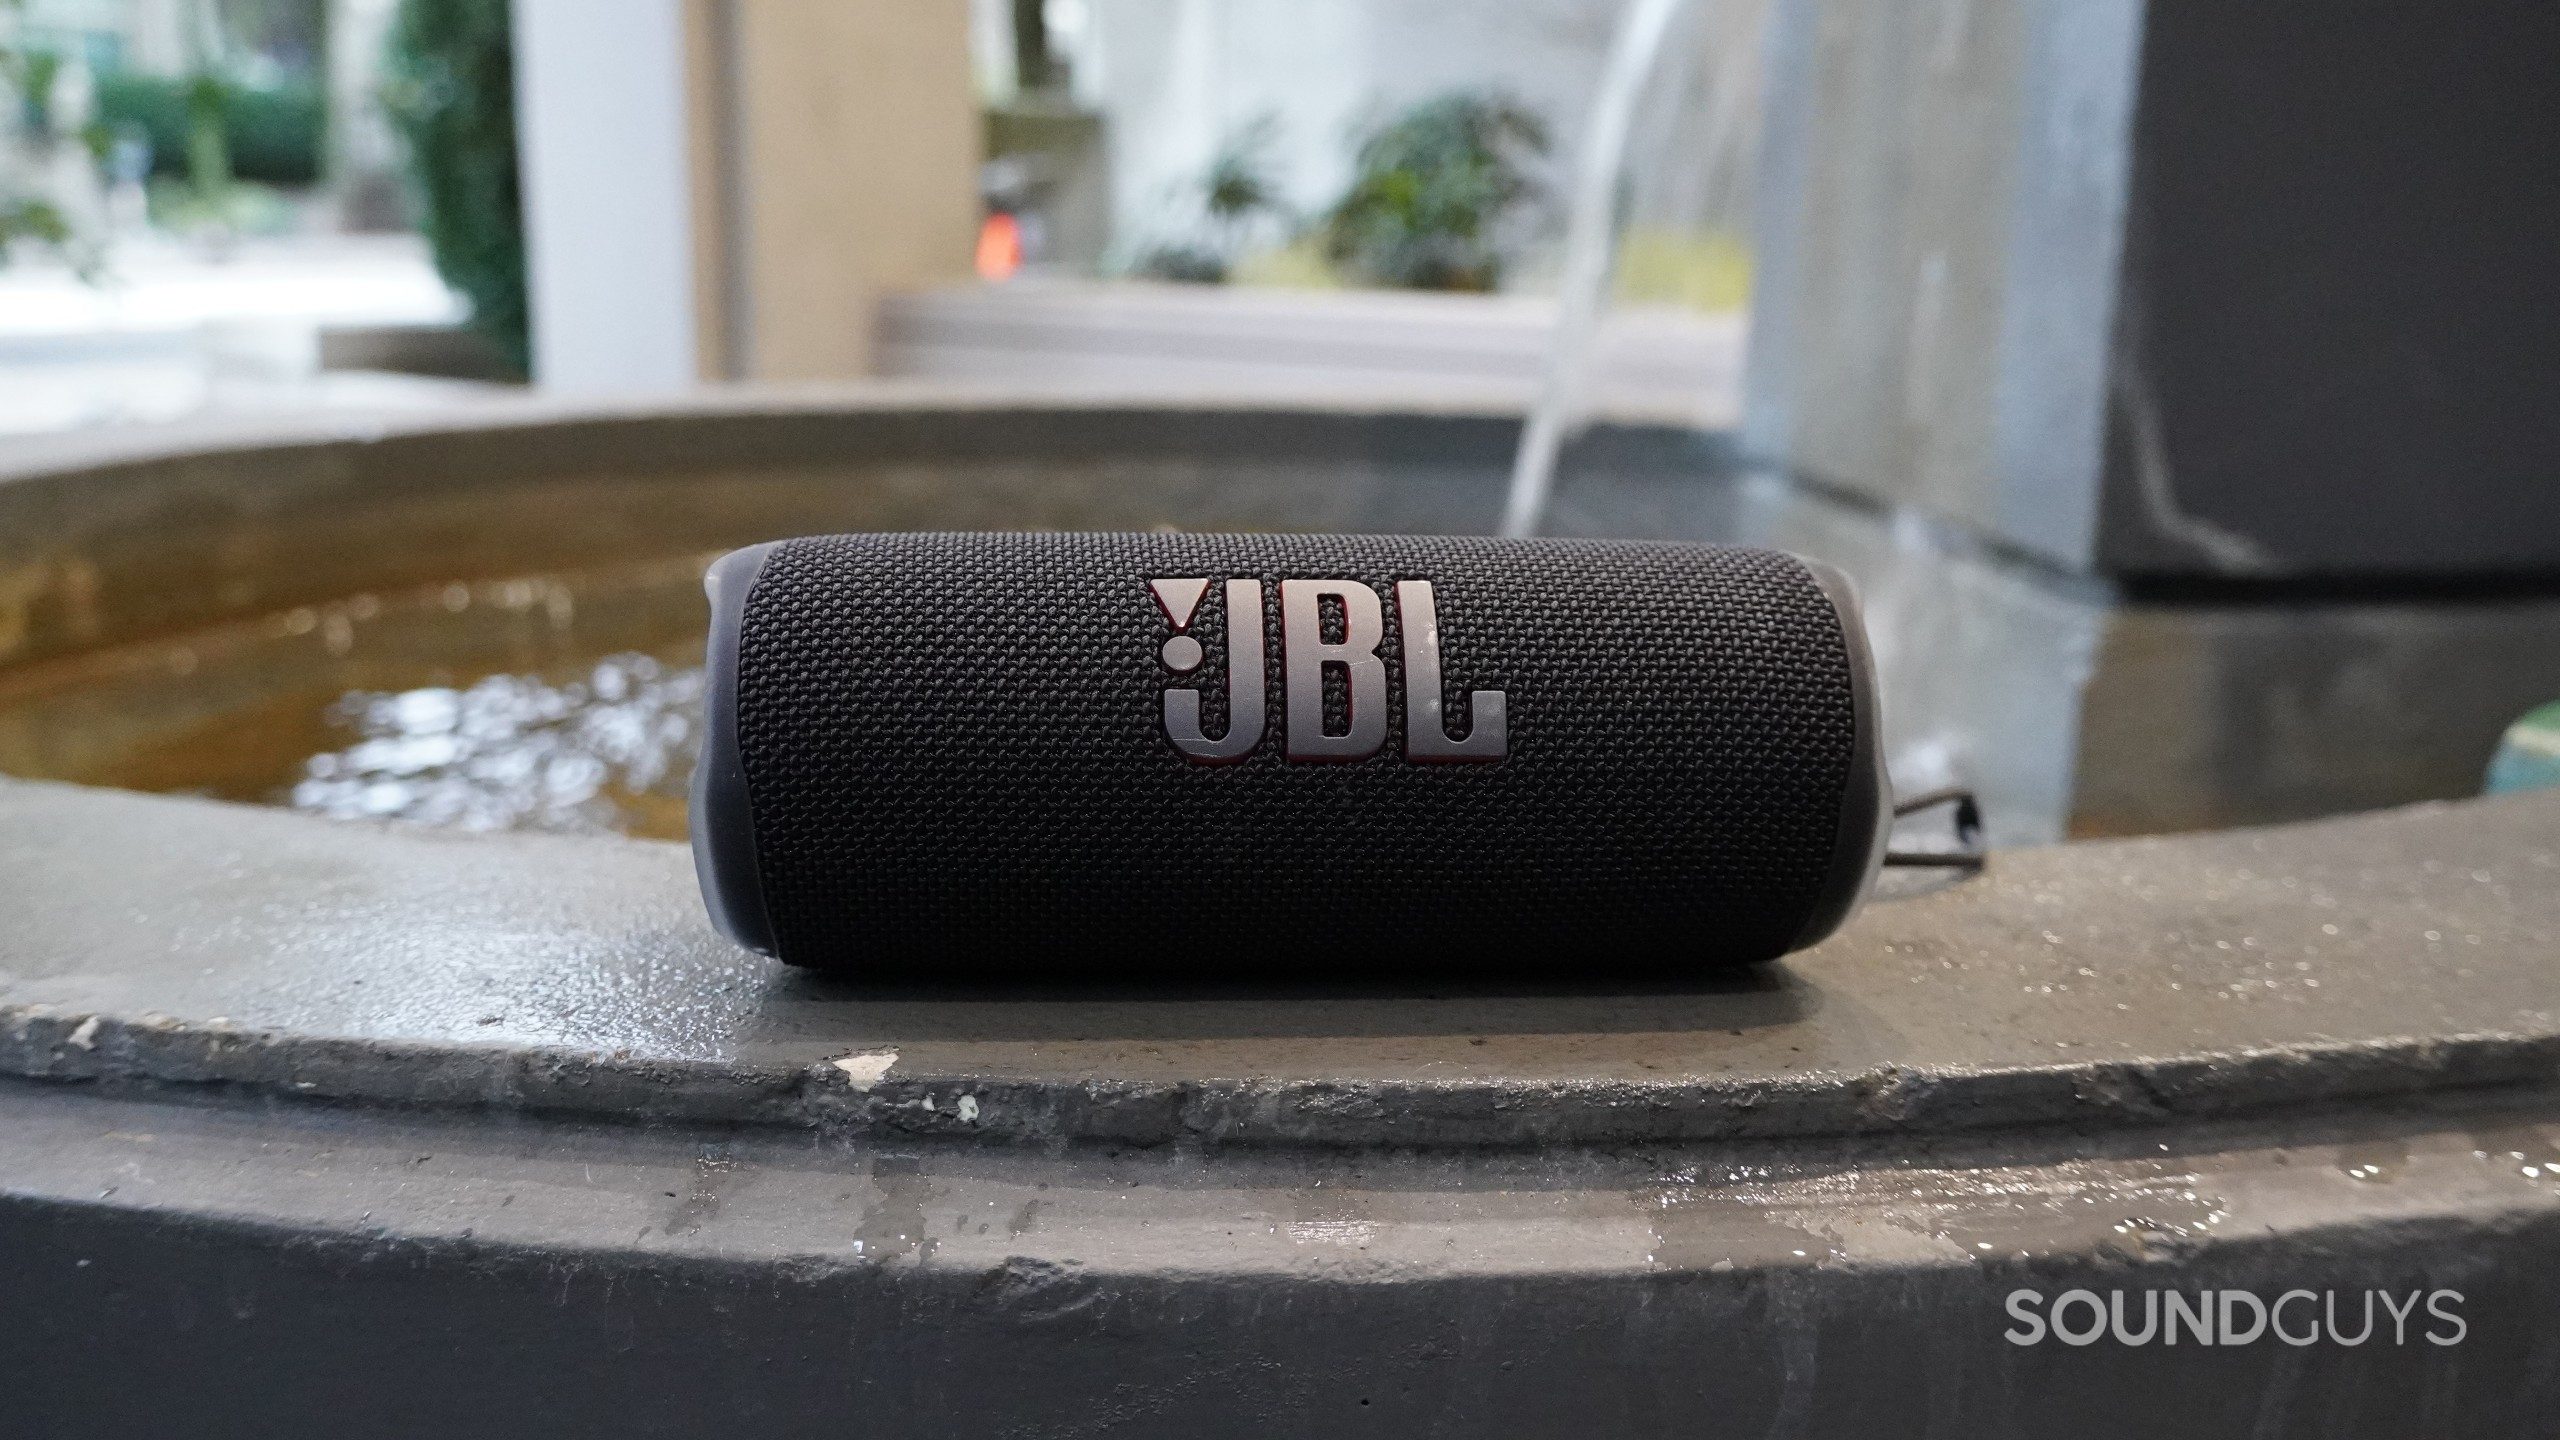  JBL Flip 6 - Portable Bluetooth Speaker, powerful sound and  deep bass, IPX7 waterproof, 12 hours of playtime, JBL PartyBoost for  multiple speaker pairing for home, outdoor and travel (Teal) : Electronics